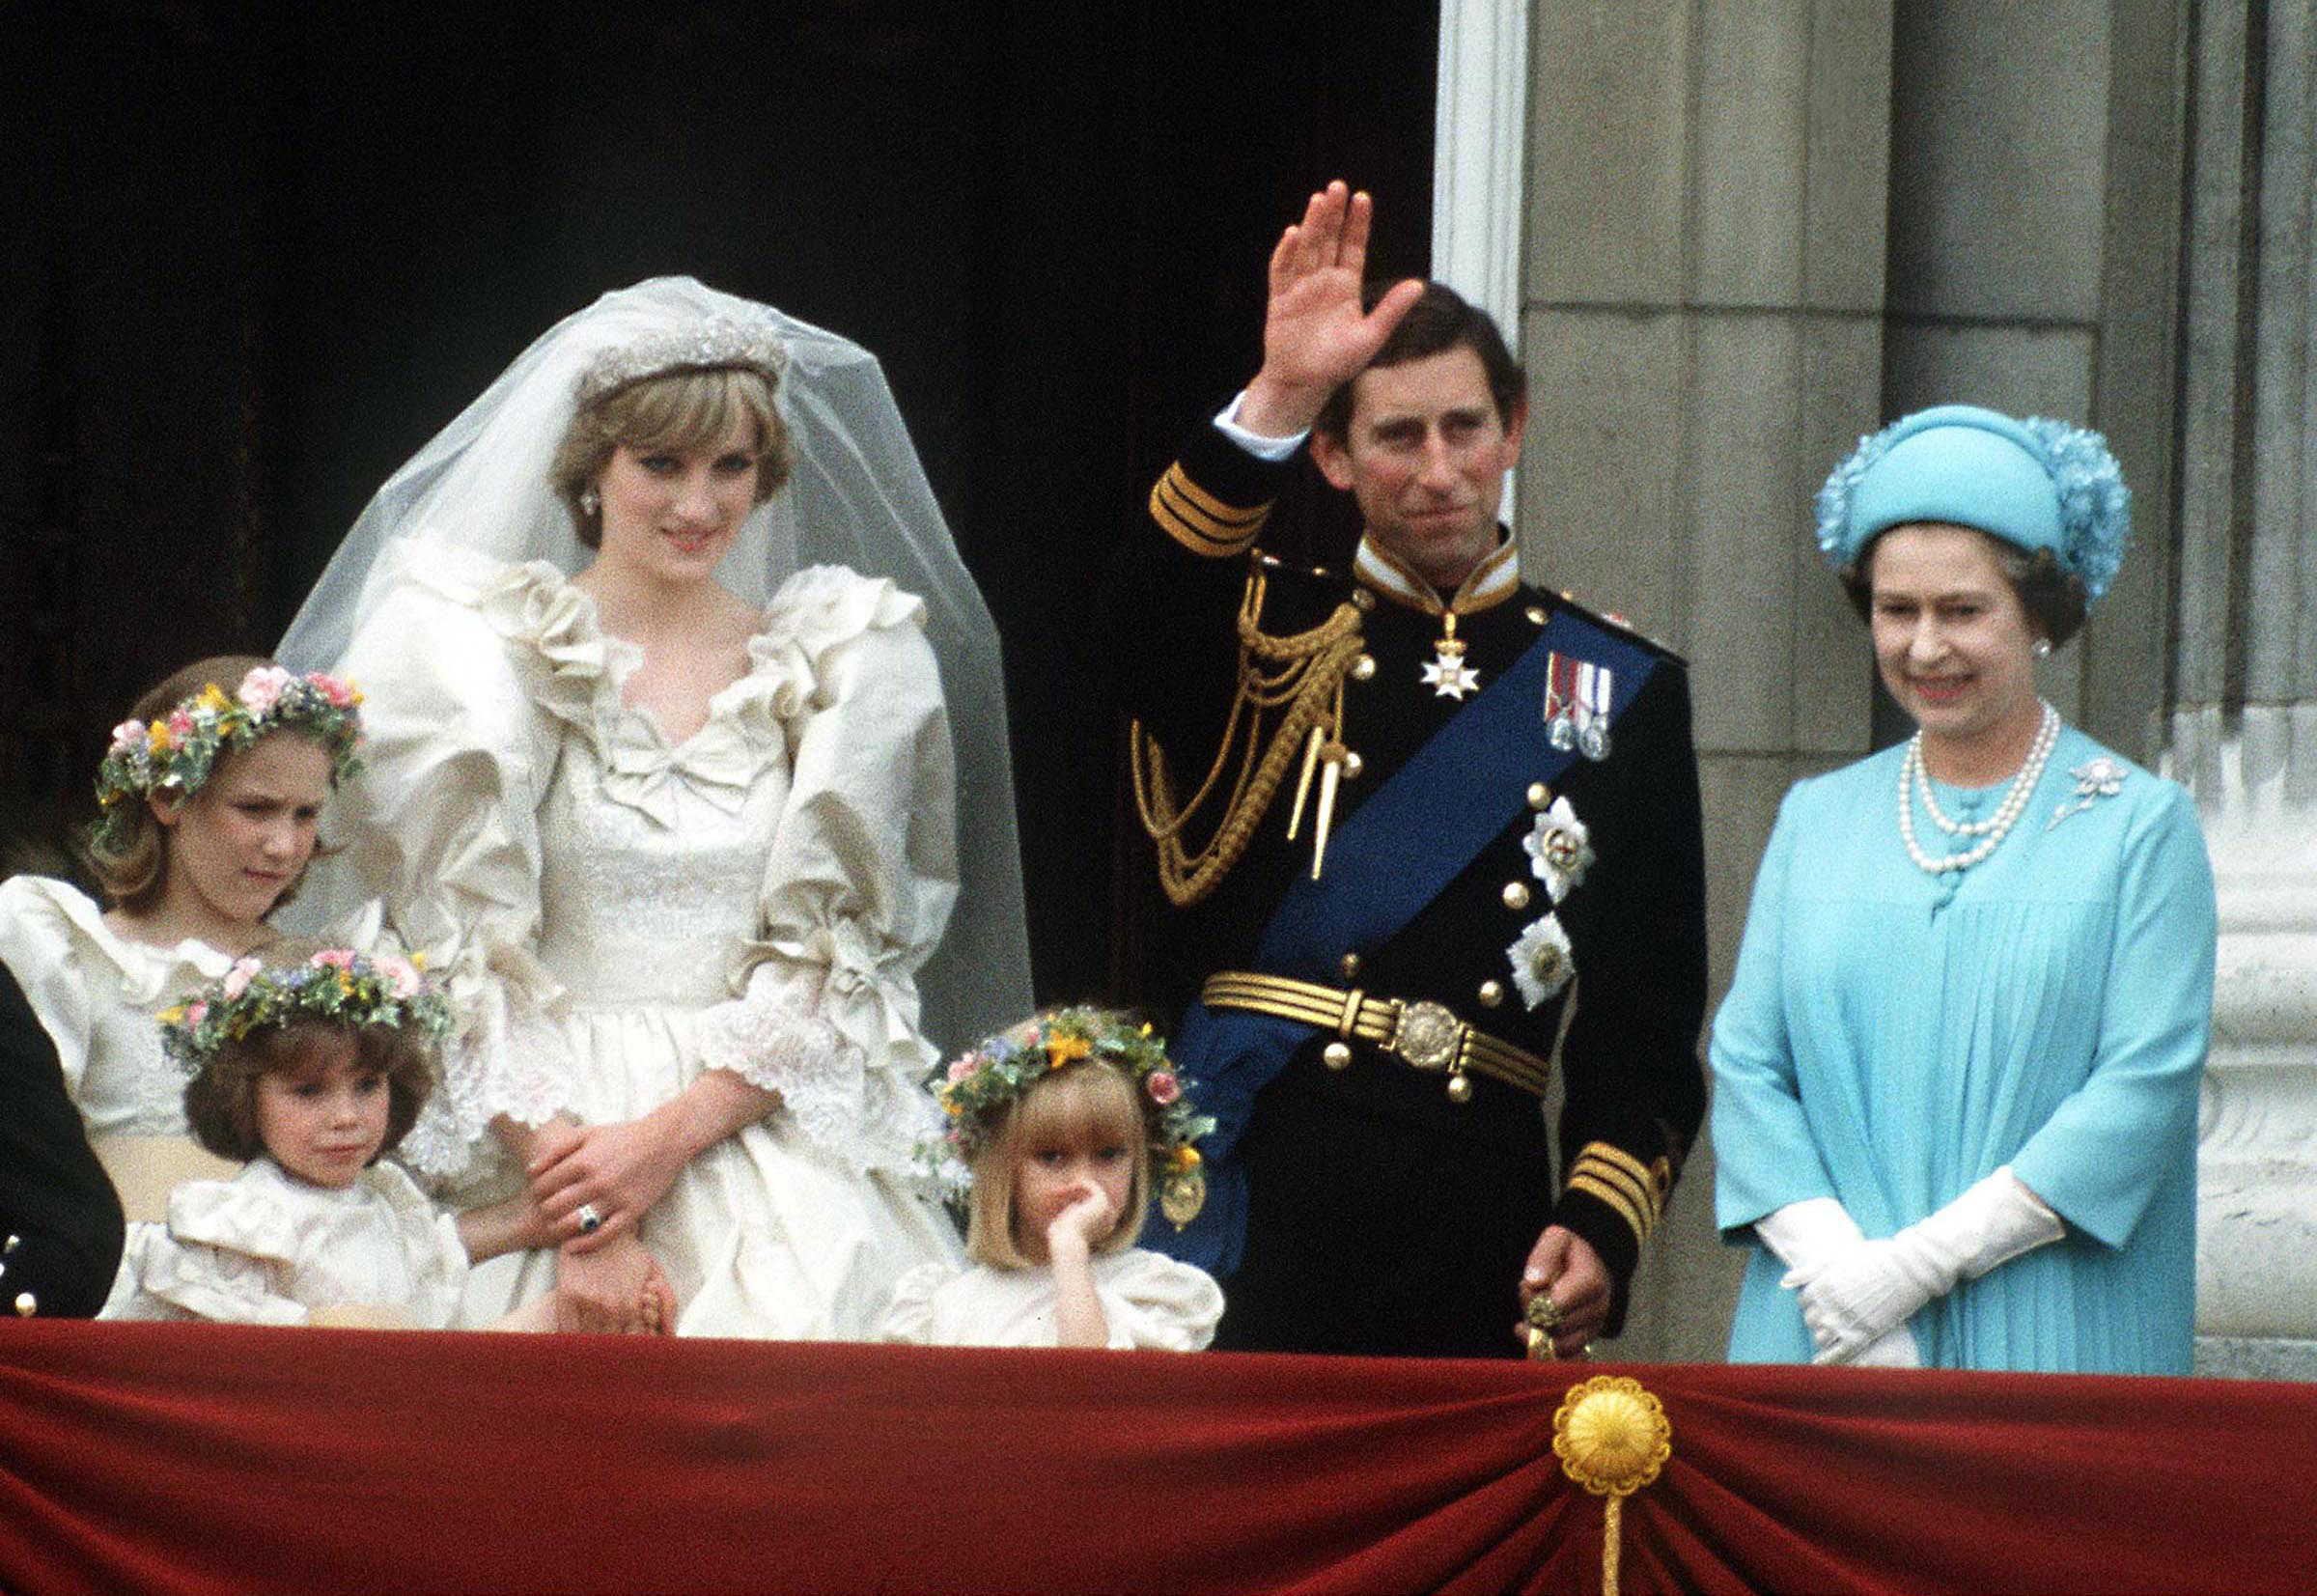 The Queen with Charles and Diana on their wedding day.